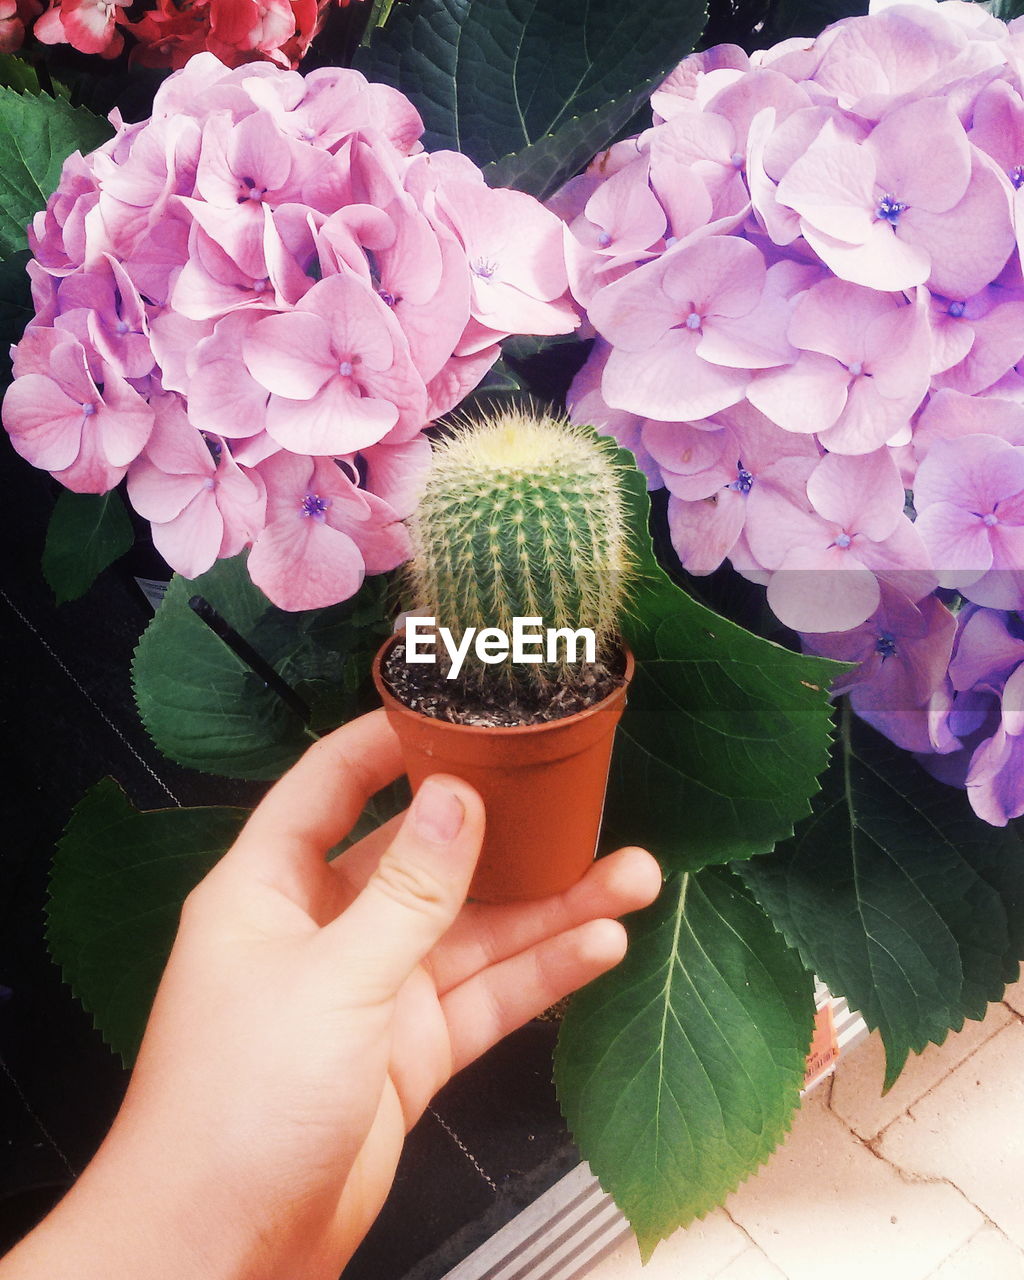 Cropped image of person holding potted cactus plant by purple hydrangea flowers